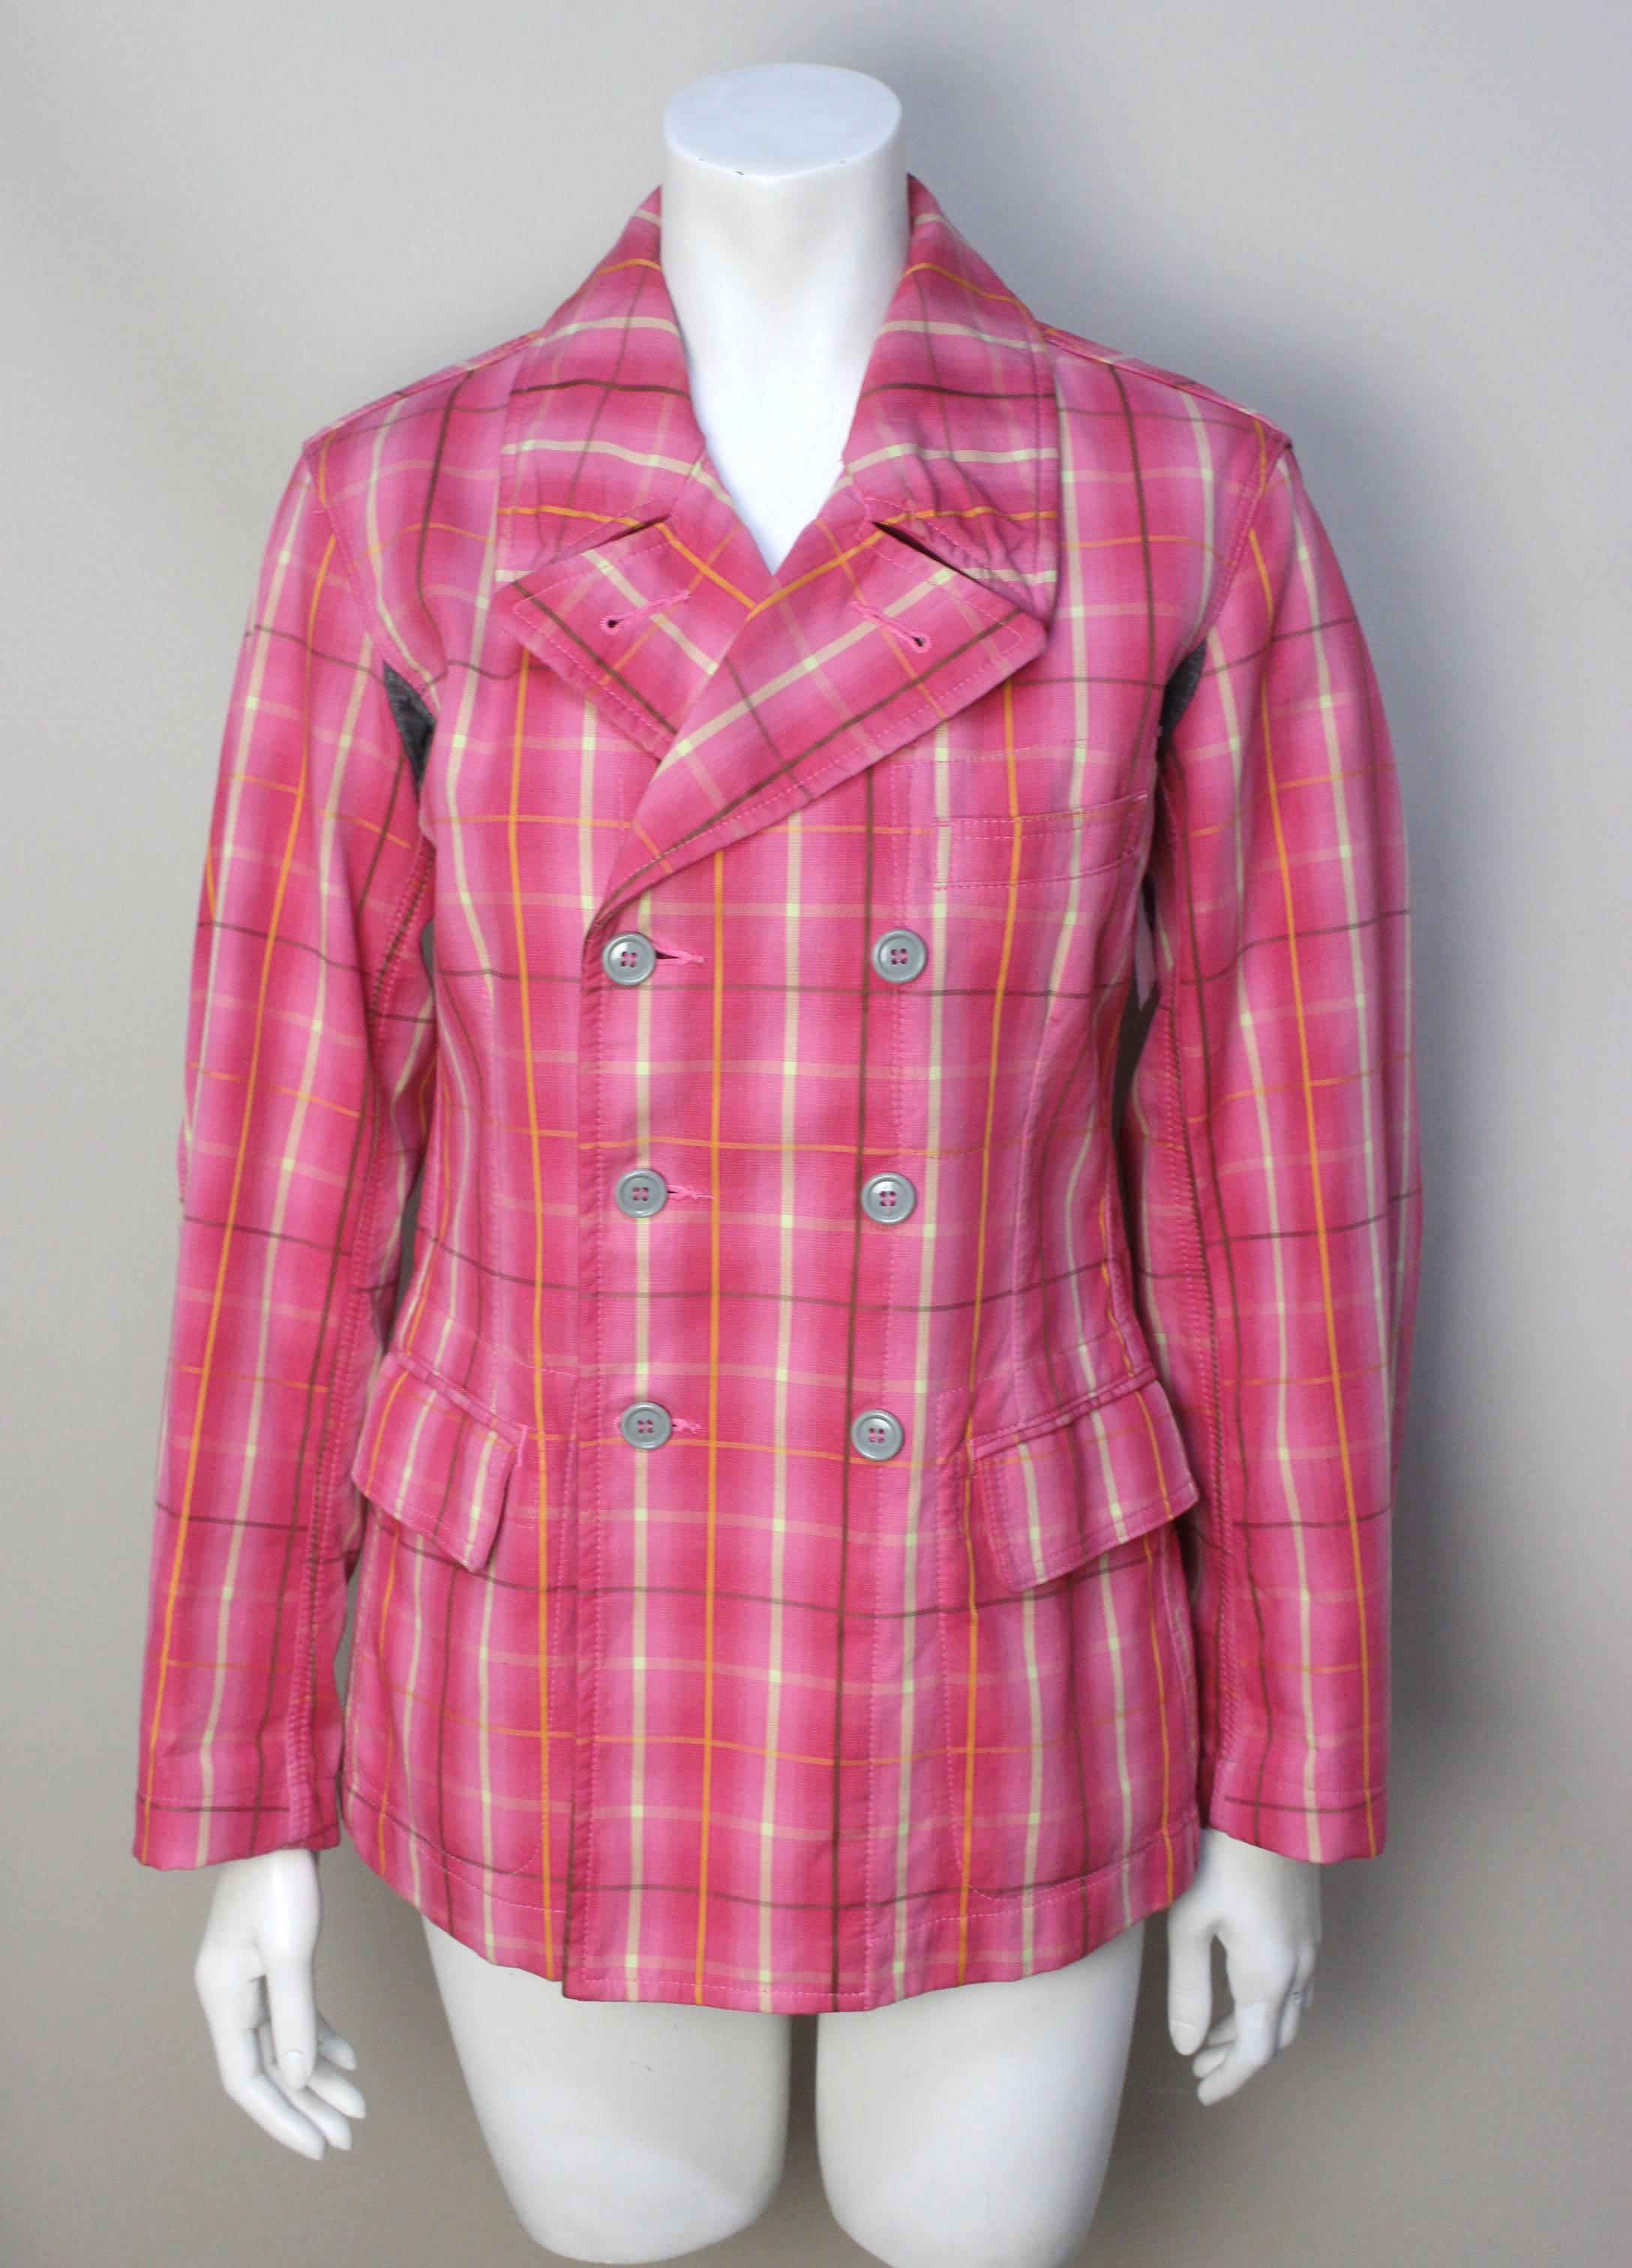 This vibrant pink plaid jacket has a quirky detail of grey wool armpit inserts that tags it as a Comme Des Garcons design. The body is fitted and double breasted. The bright cotton plaid fabric is lined in an earth tone corduroy, another eccentric